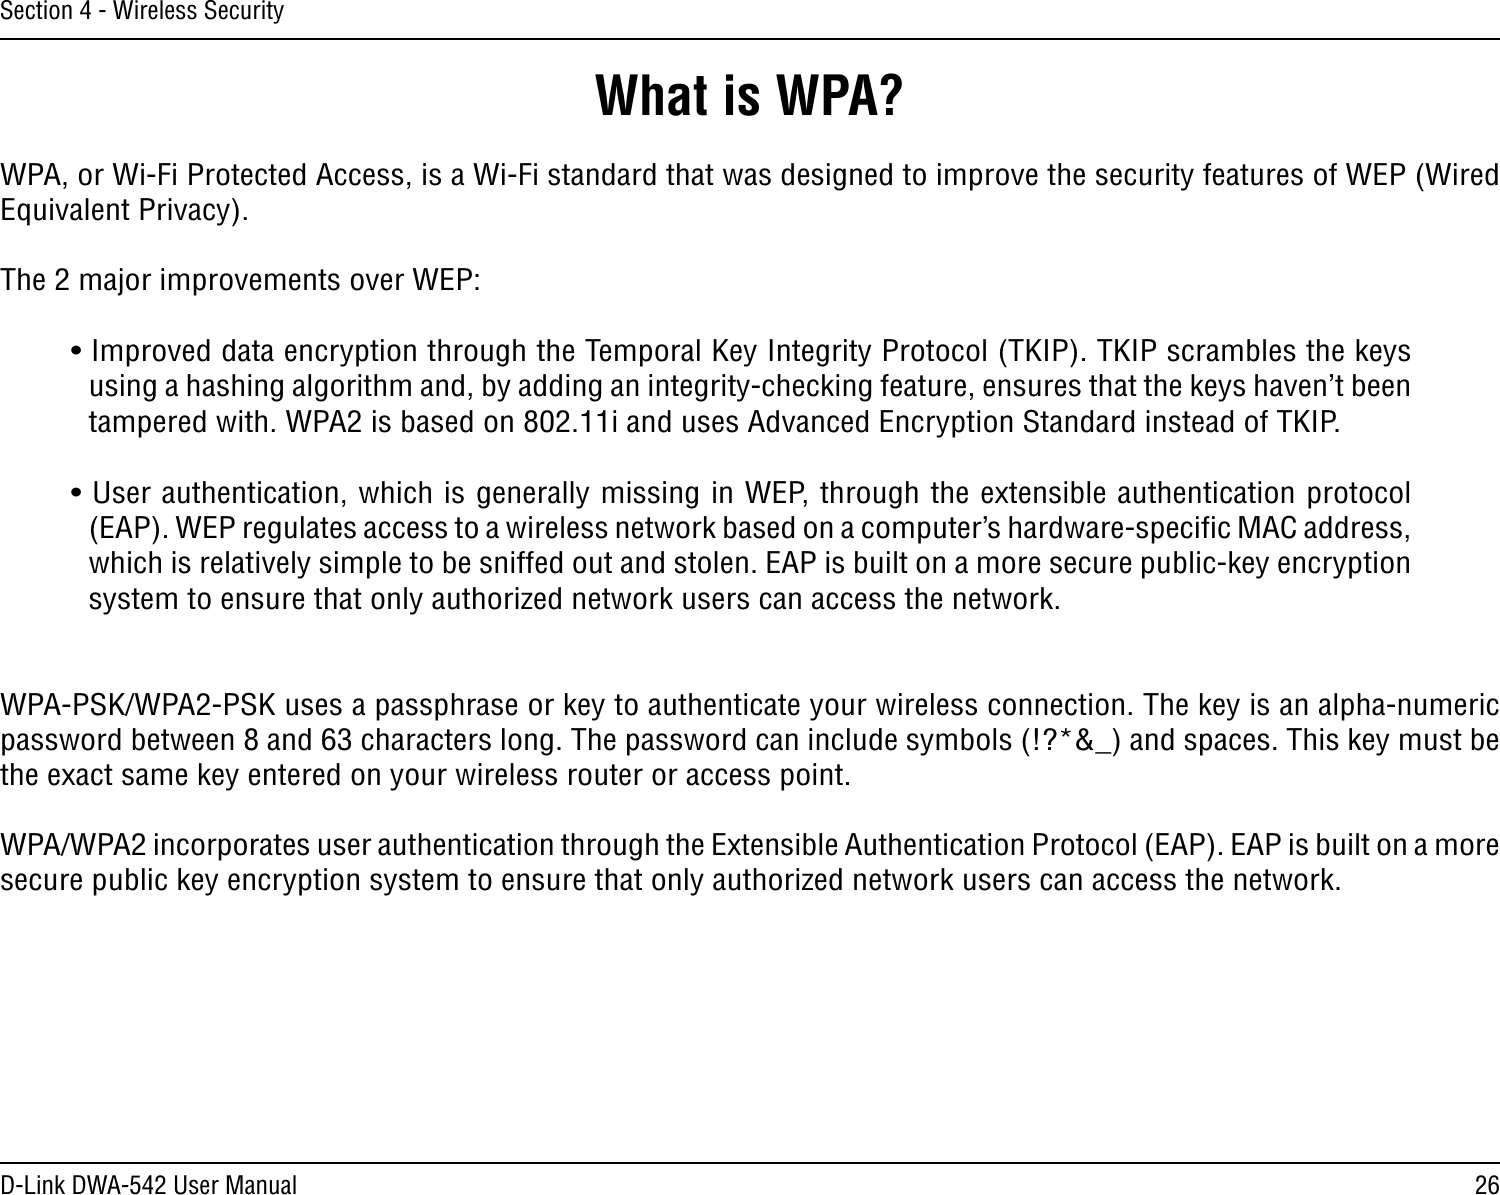 26D-Link DWA-542 User ManualSection 4 - Wireless SecurityWhat is WPA?WPA, or Wi-Fi Protected Access, is a Wi-Fi standard that was designed to improve the security features of WEP (Wired Equivalent Privacy).  The 2 major improvements over WEP: • Improved data encryption through the Temporal Key Integrity Protocol (TKIP). TKIP scrambles the keys using a hashing algorithm and, by adding an integrity-checking feature, ensures that the keys haven’t been tampered with. WPA2 is based on 802.11i and uses Advanced Encryption Standard instead of TKIP.• User authentication, which is generally missing in WEP, through the extensible authentication protocol (EAP). WEP regulates access to a wireless network based on a computer’s hardware-speciﬁc MAC address, which is relatively simple to be sniffed out and stolen. EAP is built on a more secure public-key encryption system to ensure that only authorized network users can access the network.WPA-PSK/WPA2-PSK uses a passphrase or key to authenticate your wireless connection. The key is an alpha-numeric password between 8 and 63 characters long. The password can include symbols (!?*&amp;_) and spaces. This key must be the exact same key entered on your wireless router or access point.WPA/WPA2 incorporates user authentication through the Extensible Authentication Protocol (EAP). EAP is built on a more secure public key encryption system to ensure that only authorized network users can access the network.